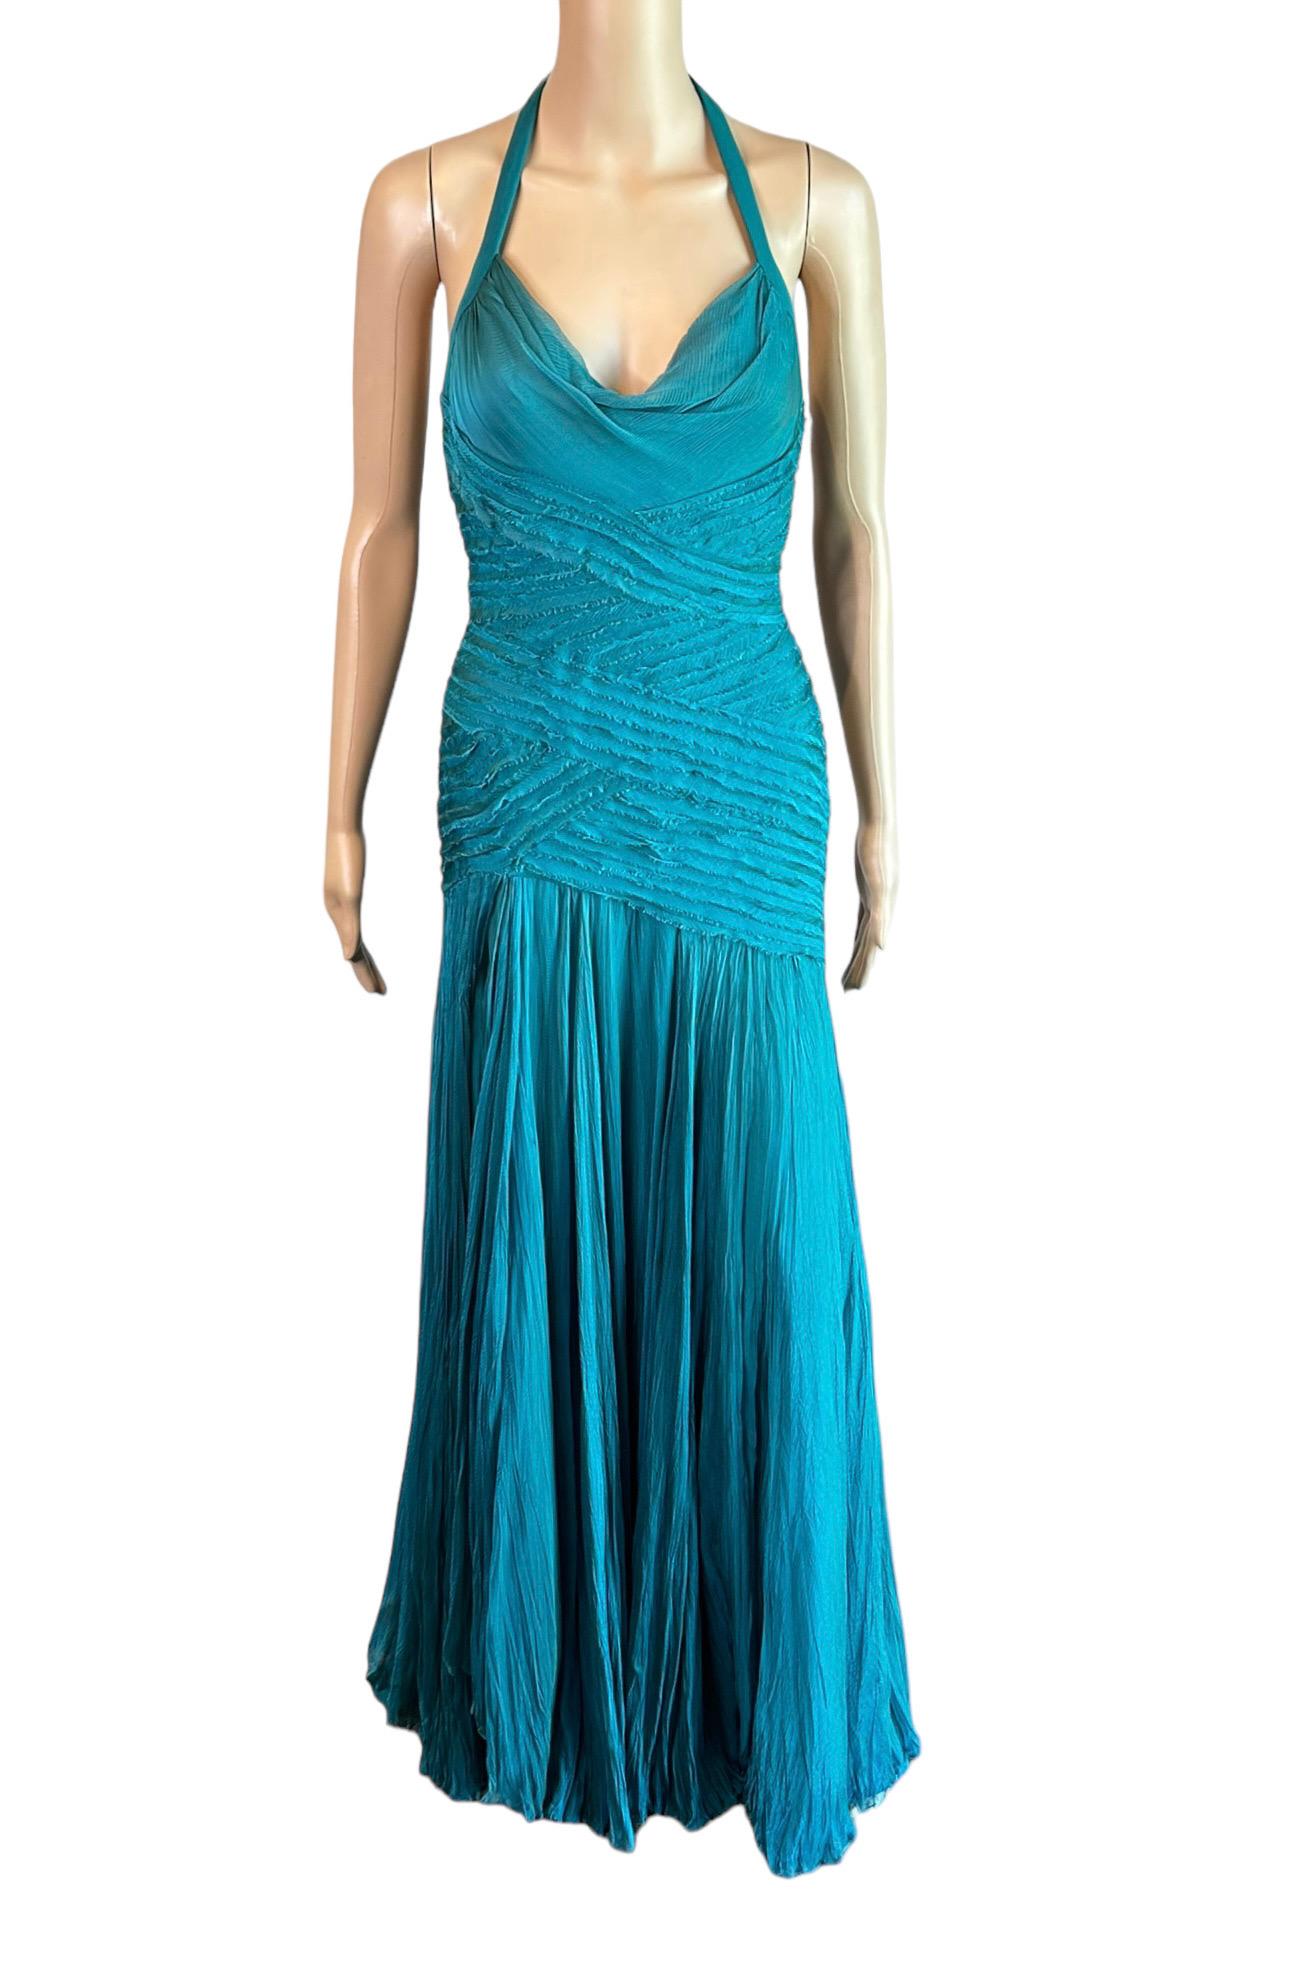 Versace F/W 2005 Runway Campaign Halter High Slit Slip Evening Dress Gown  For Sale 5